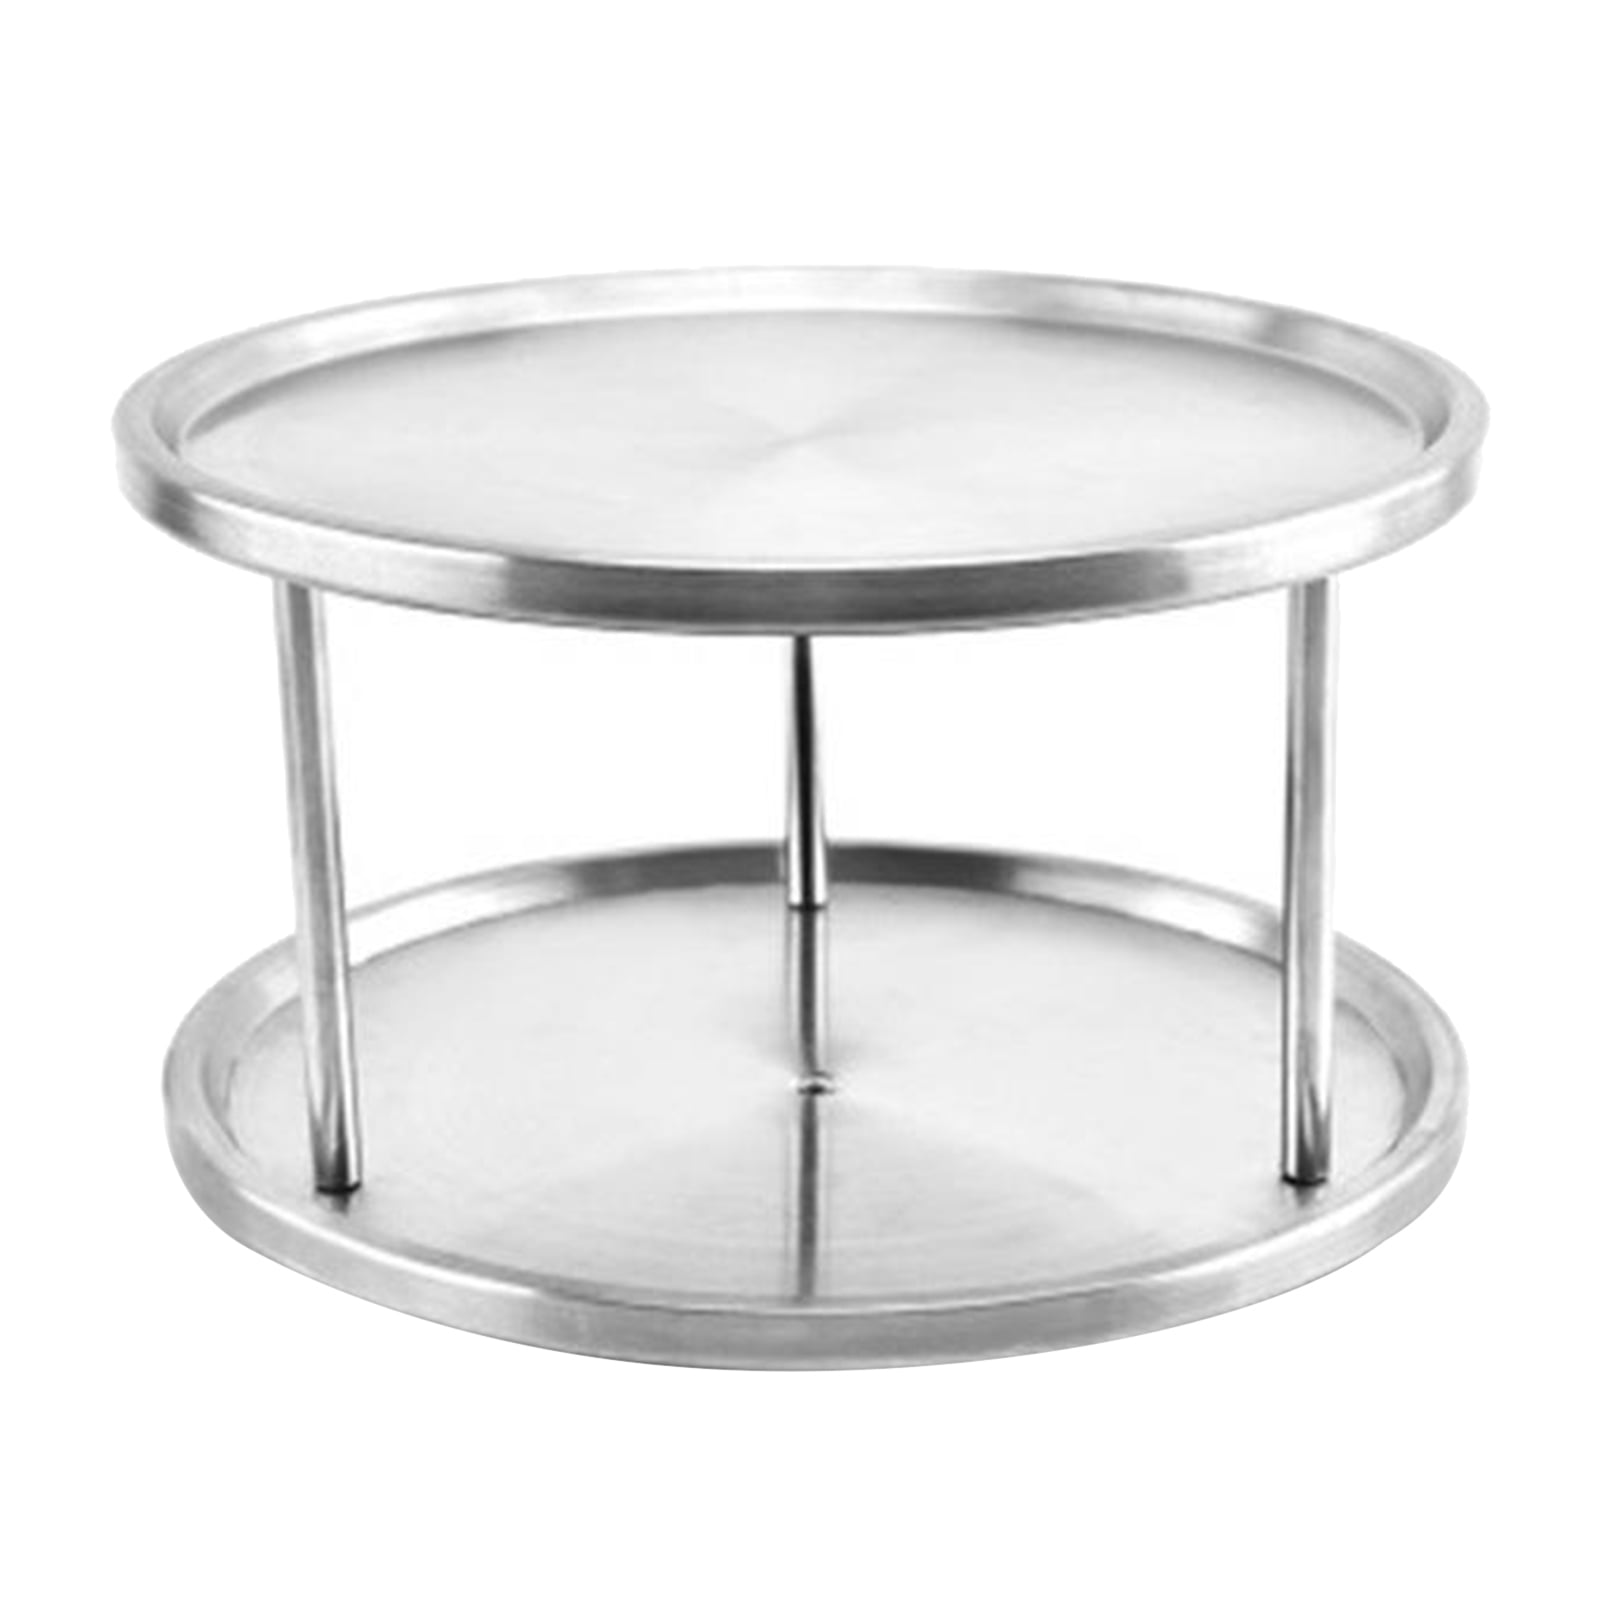 360-degree Turntable 2 Tier Design Details about    Stainless Steel Lazy Susan 